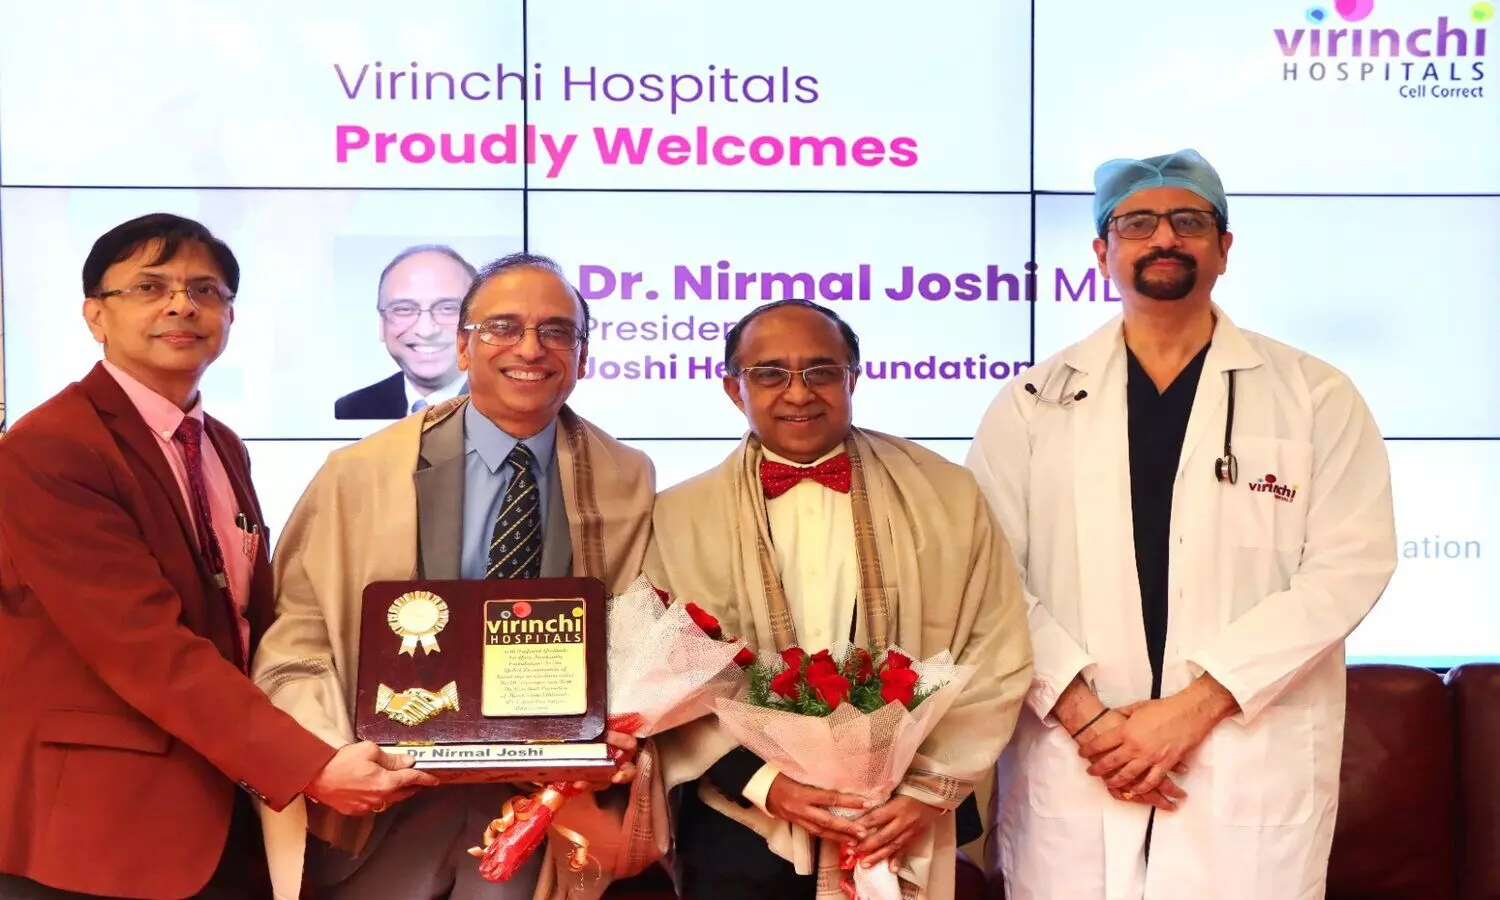 Indo-American filmmaker, Virinchi Hospitals to release documentary on early onset of heart disease among Indians